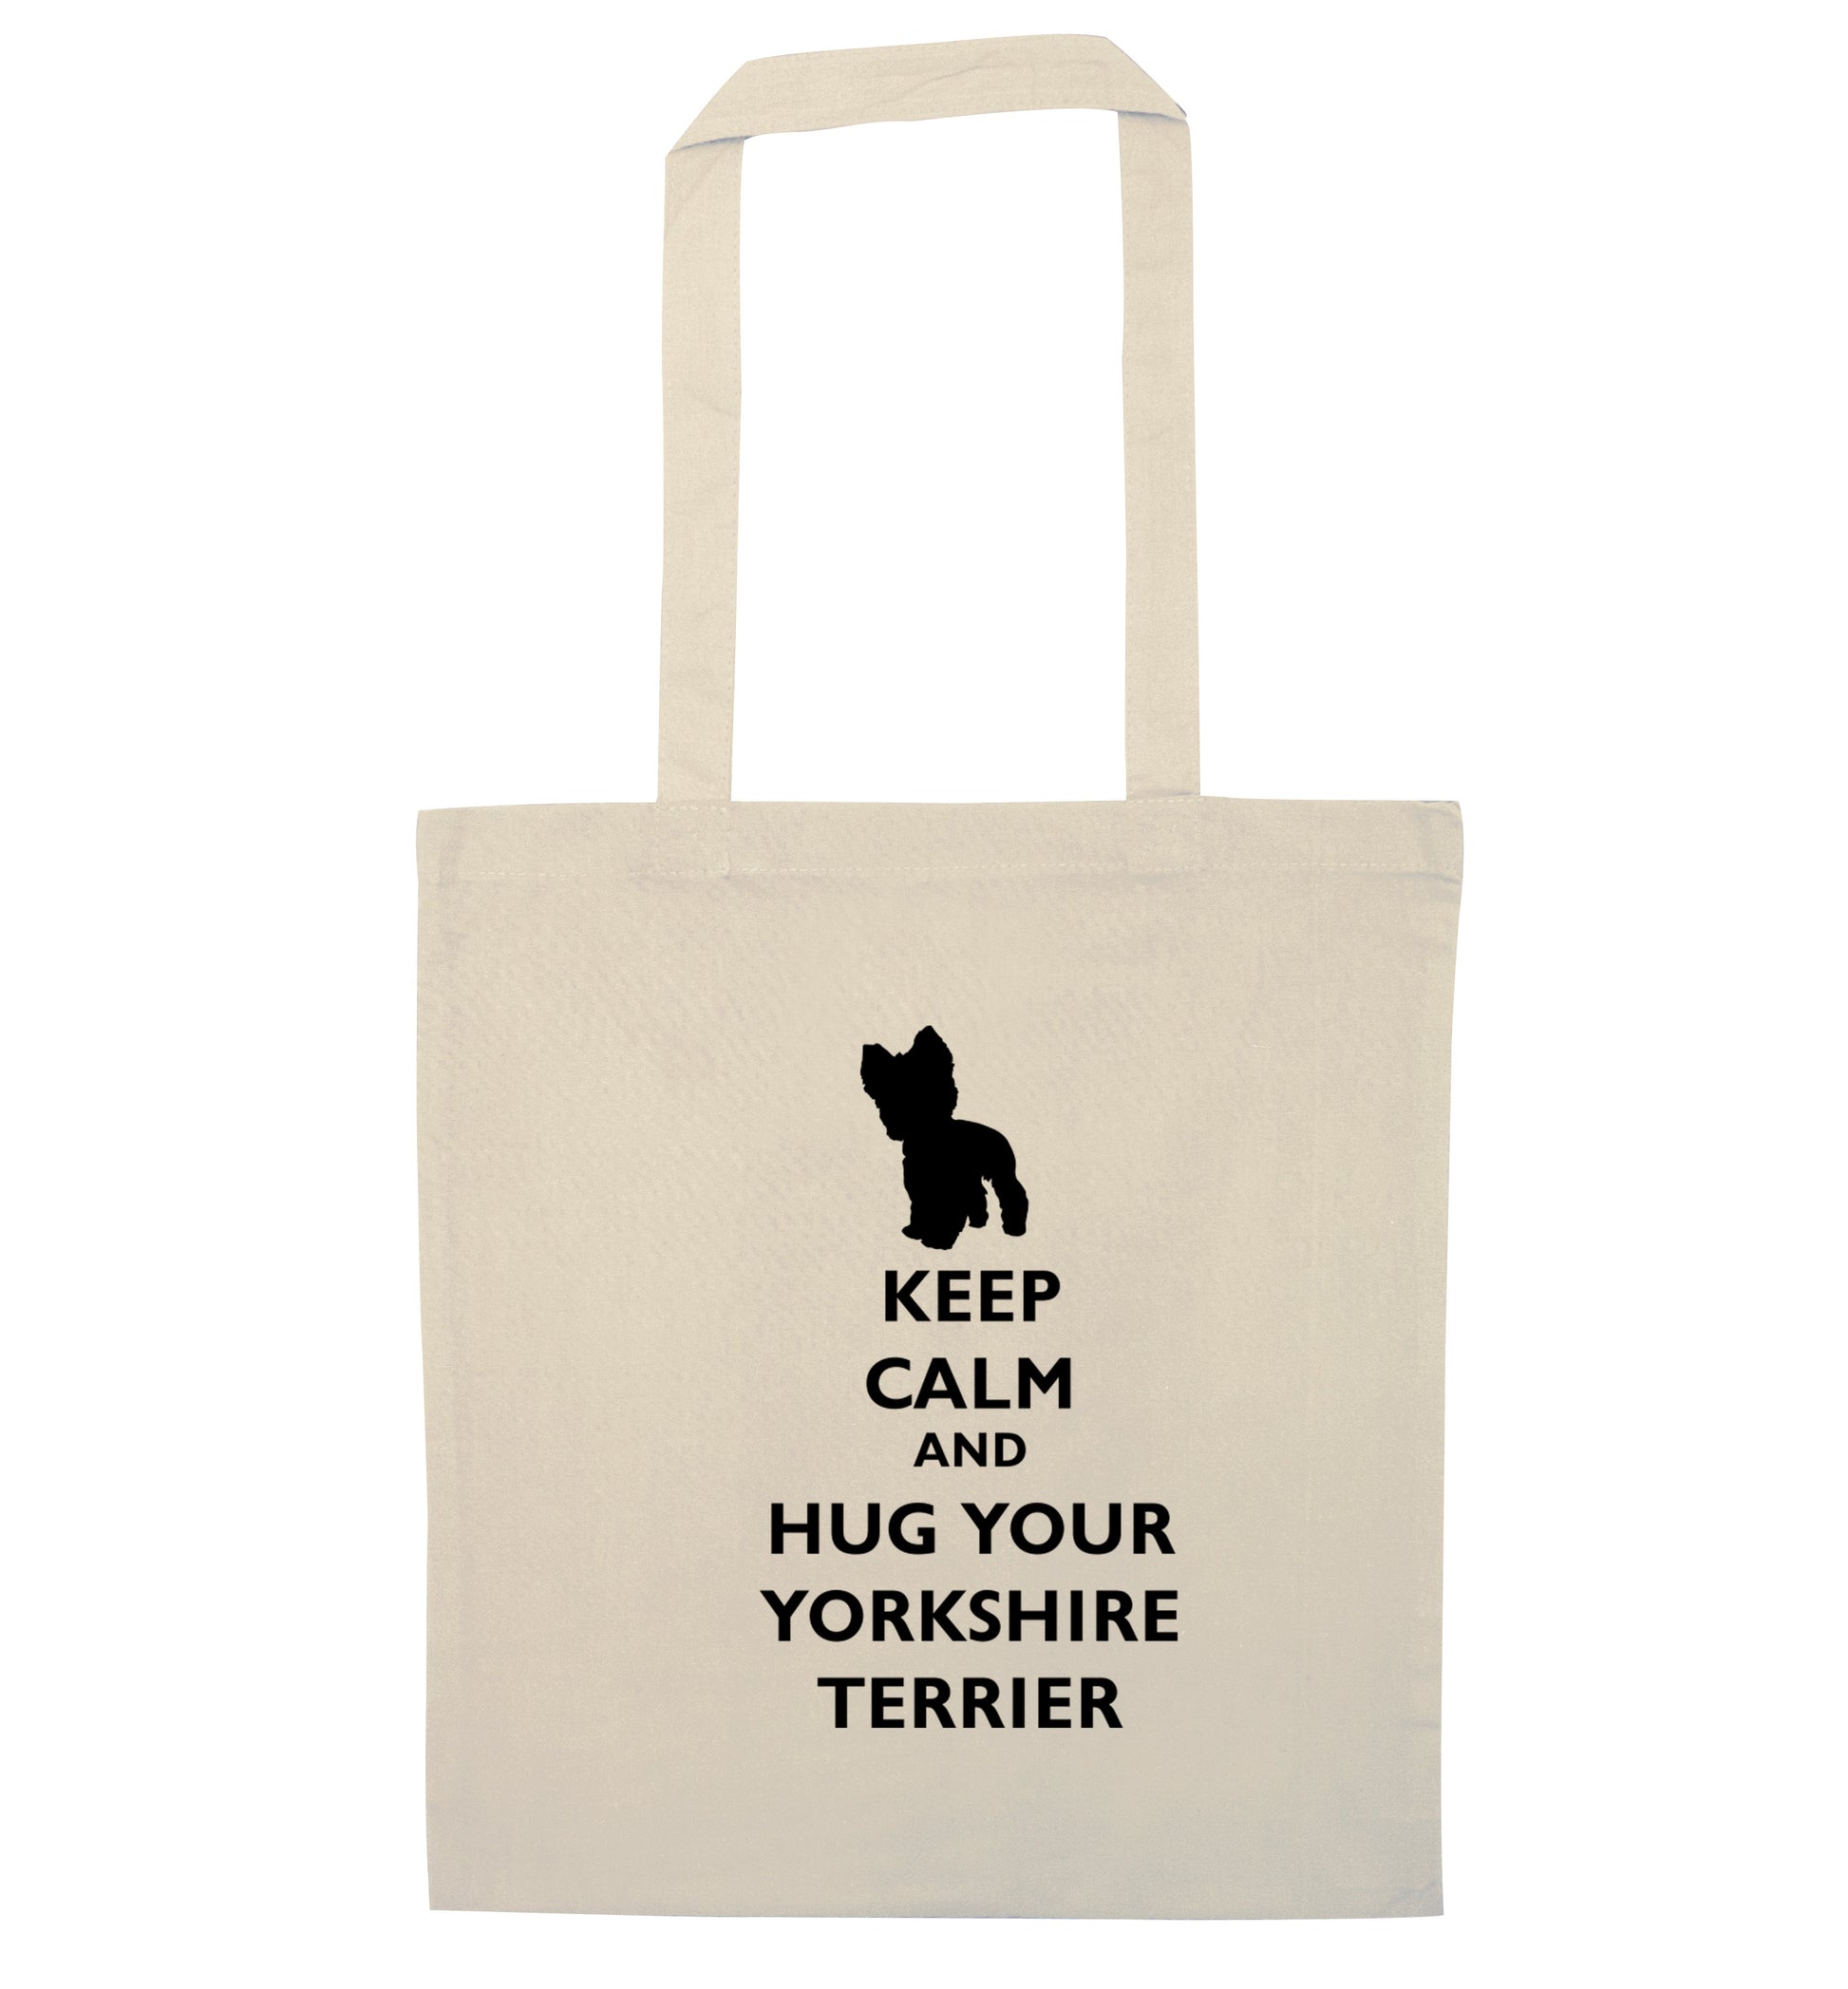 Keep calm and hug your yorkshire terrier natural tote bag